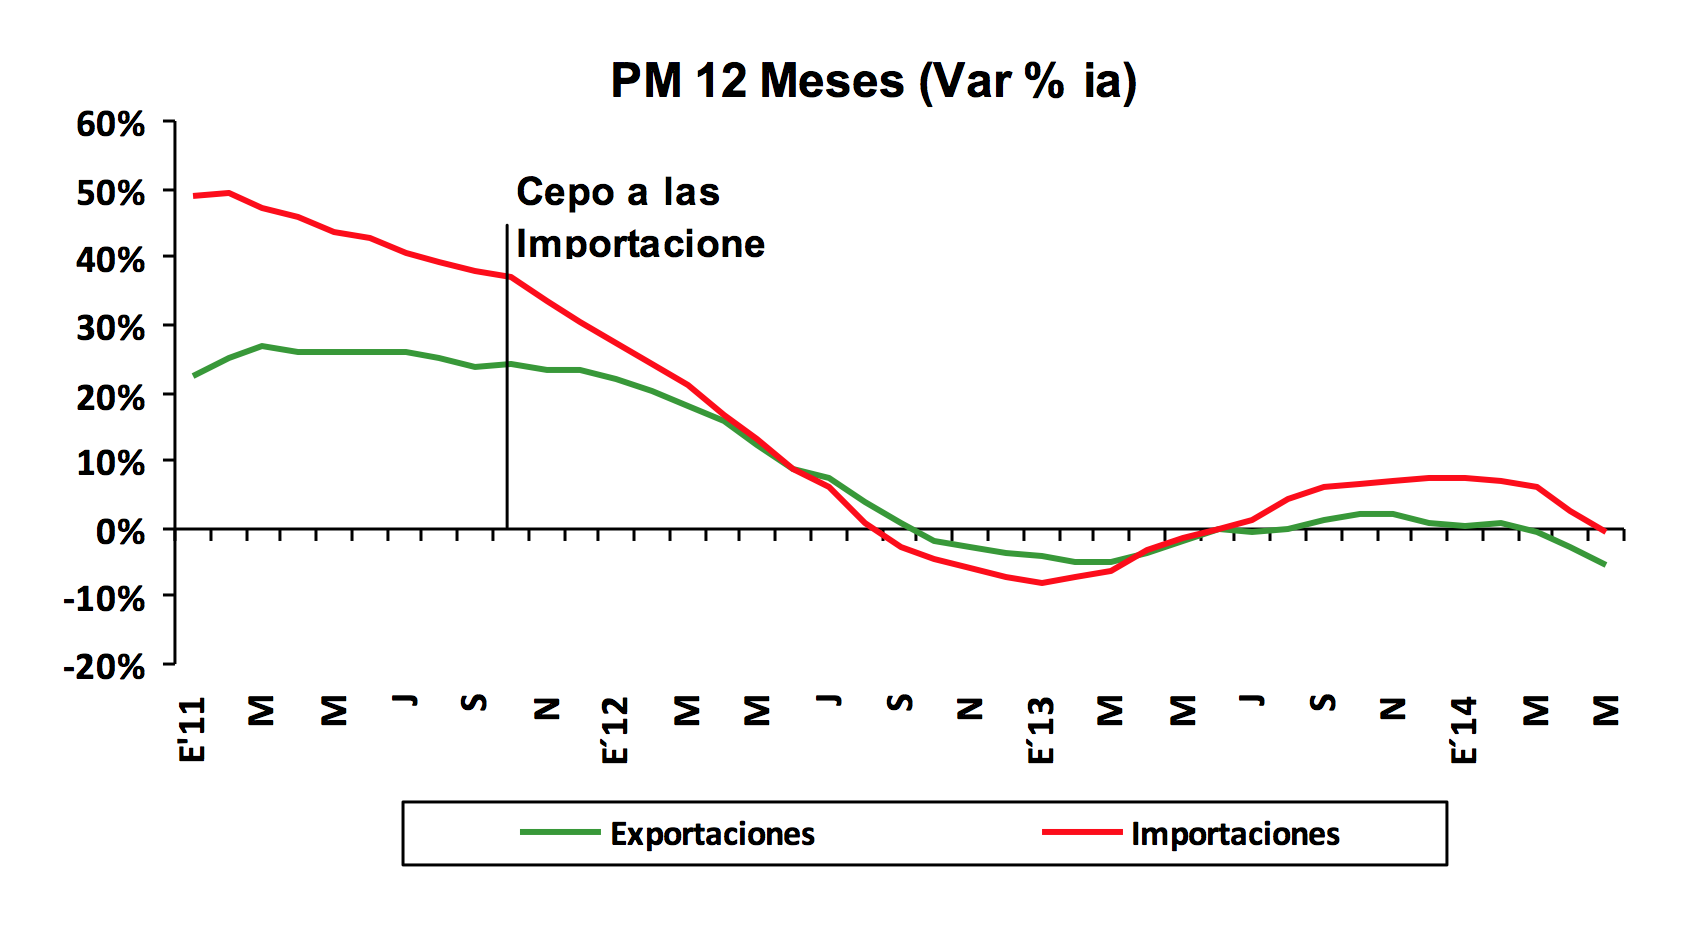 Argentina's annual variation of exports and imports, seasonally adjusted